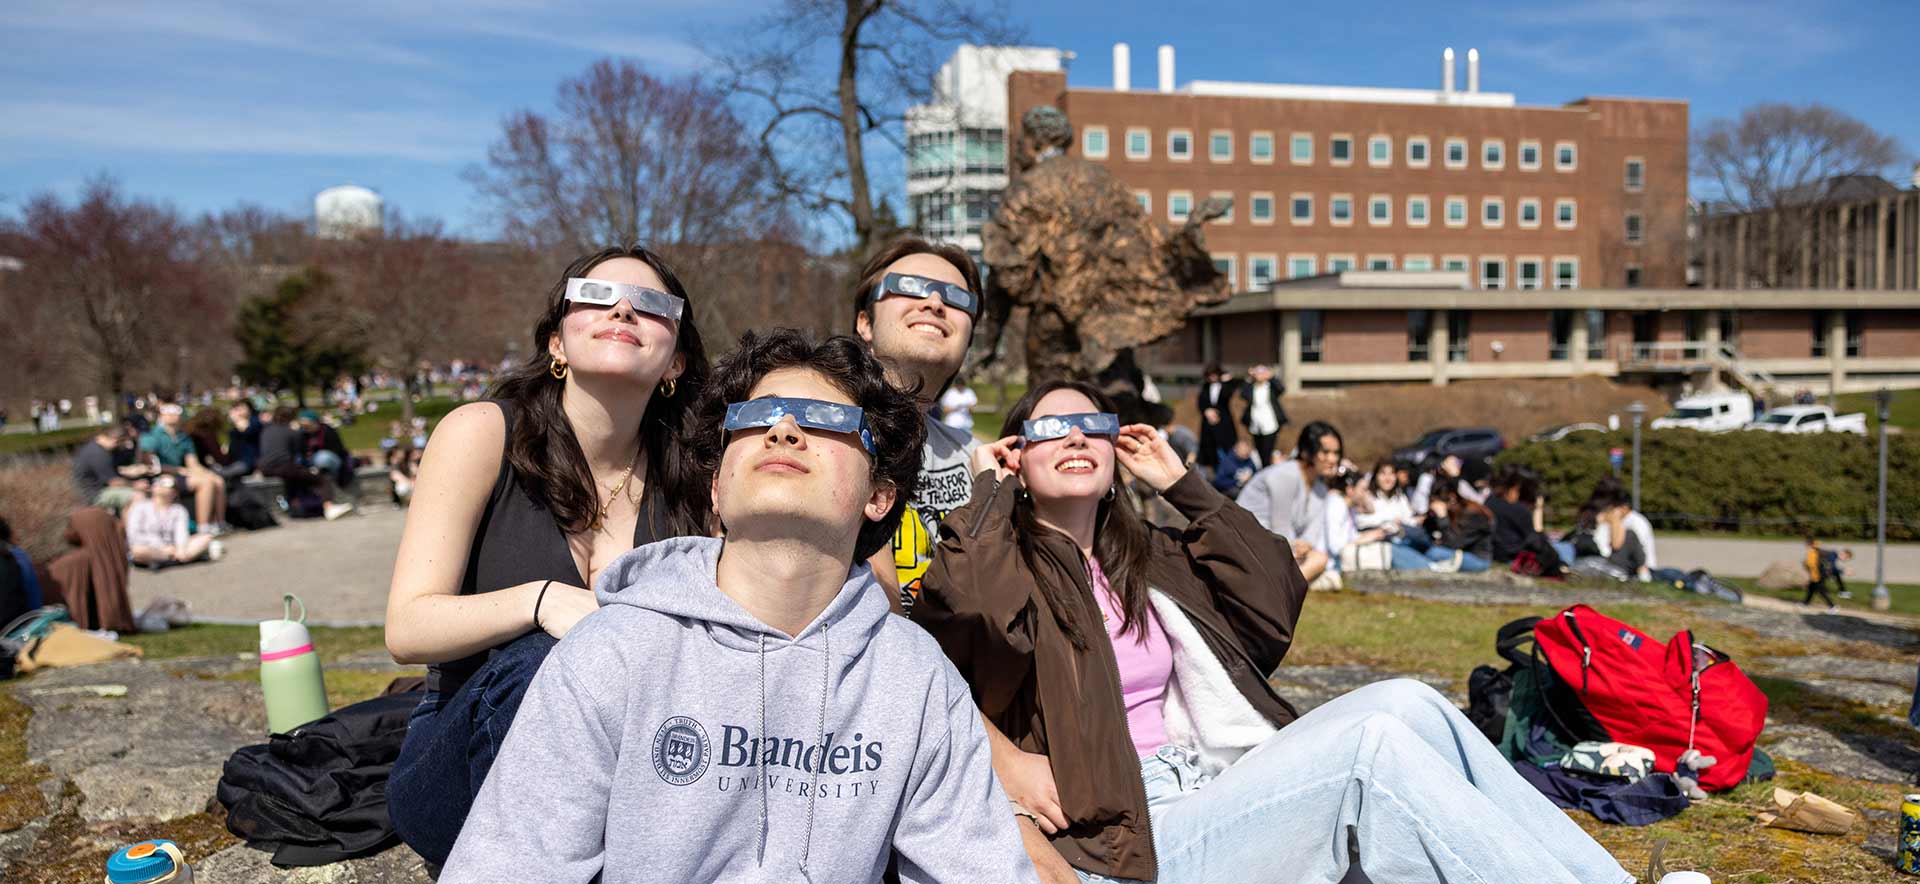 People wearing eclipse glasses on the Brandeis campus